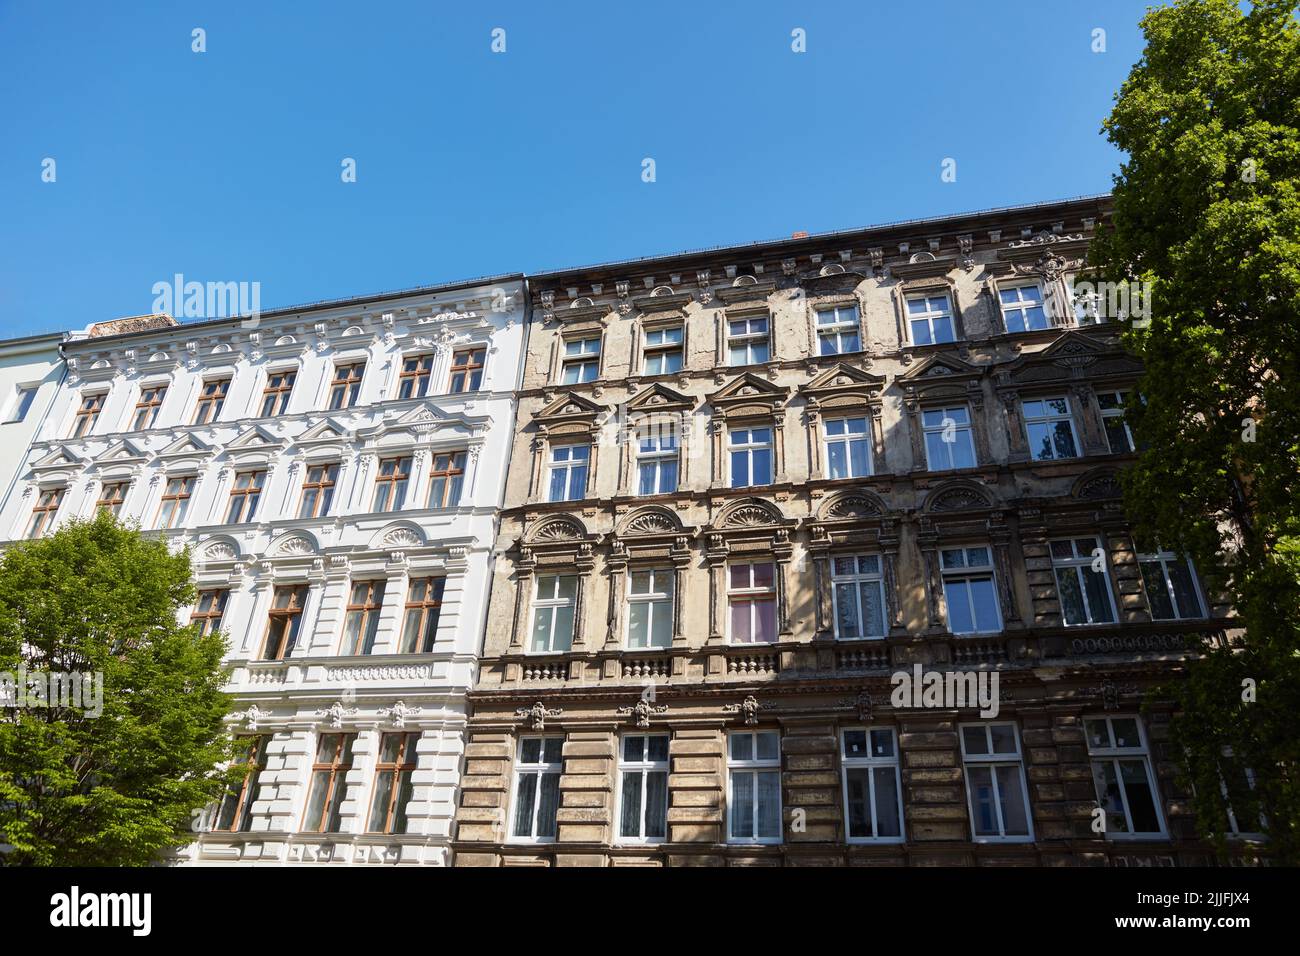 Comparison of old building facades before and after renovation and energetic insulation Stock Photo